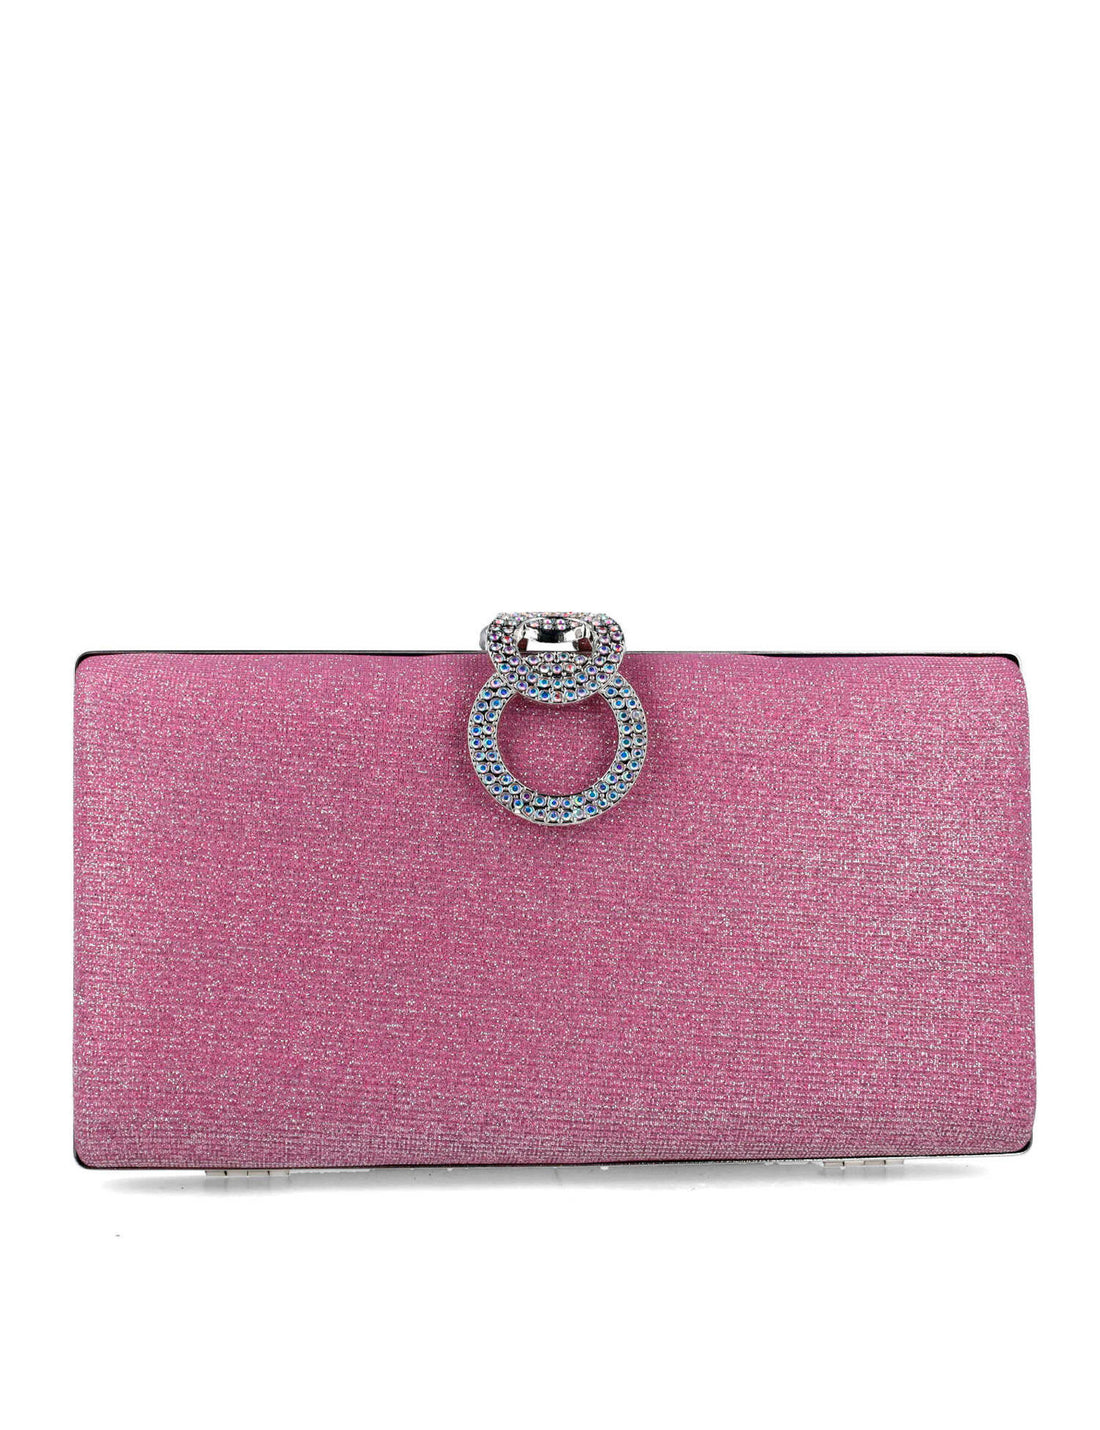 Shimmery Clutch With Embellished Hardware_85479_03_01